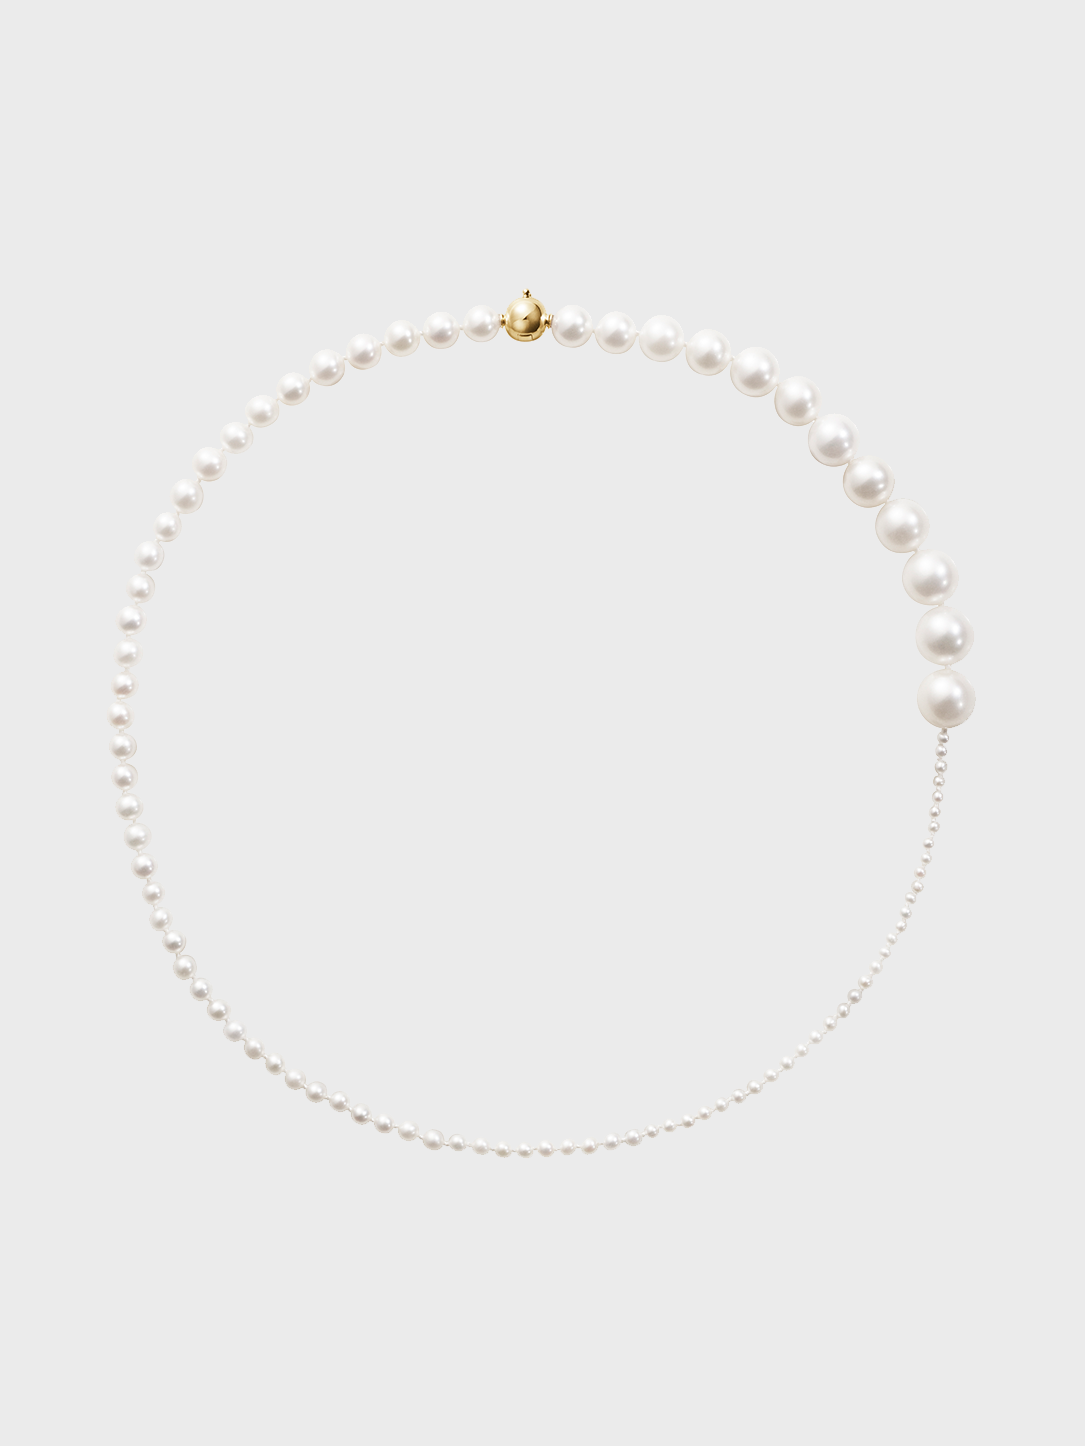 Sophie Bille Brahe - Peggy Necklace in 14k Yellow Gold